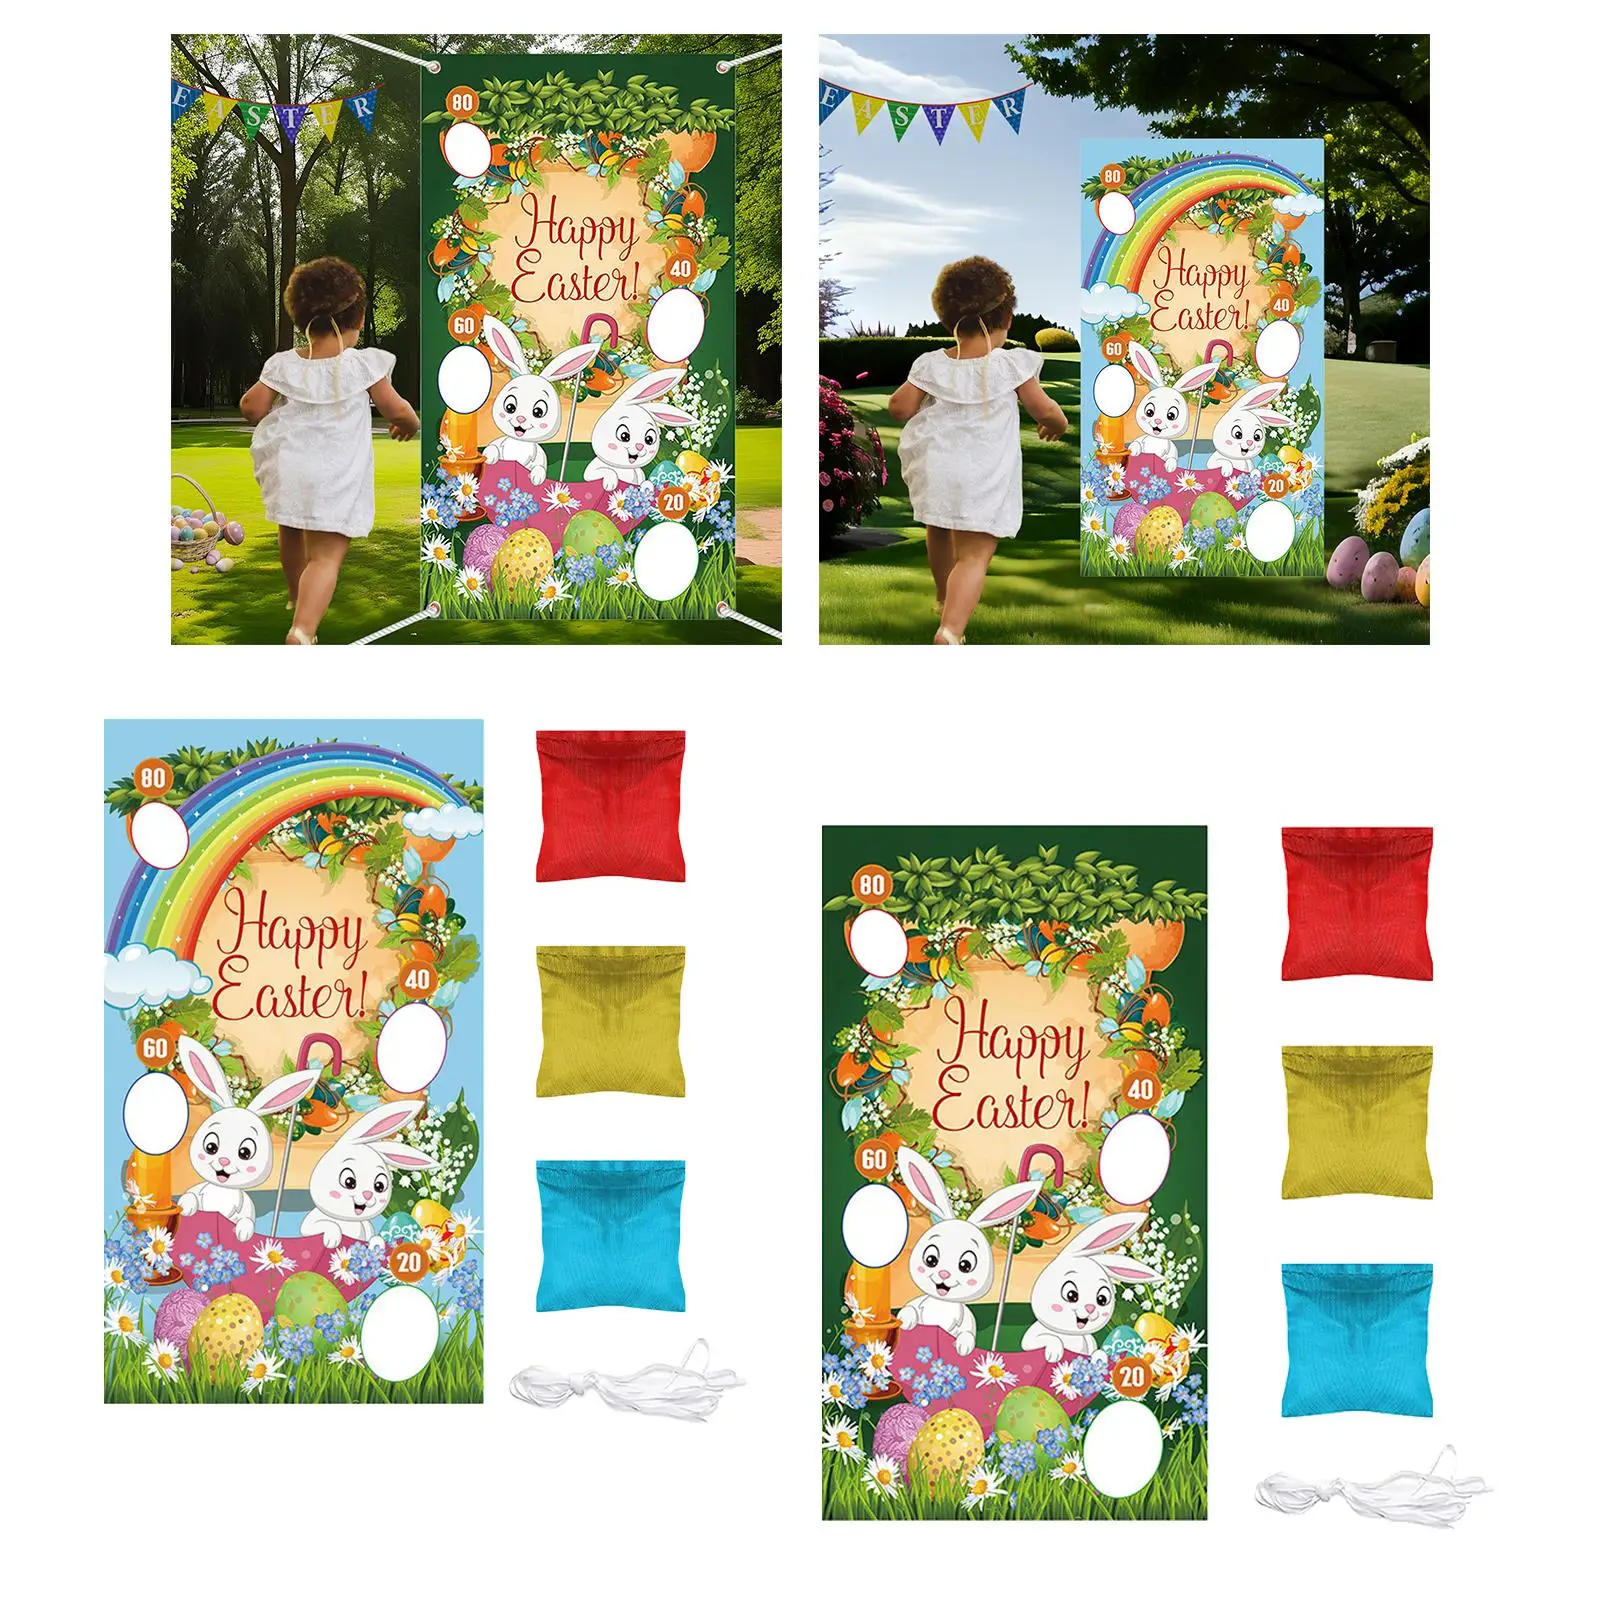 Toss Game Banner Party Supplies Photo Props Bunny Toss Games for Easter Decorations Family Gathering Easter Gifts Beach Picnics